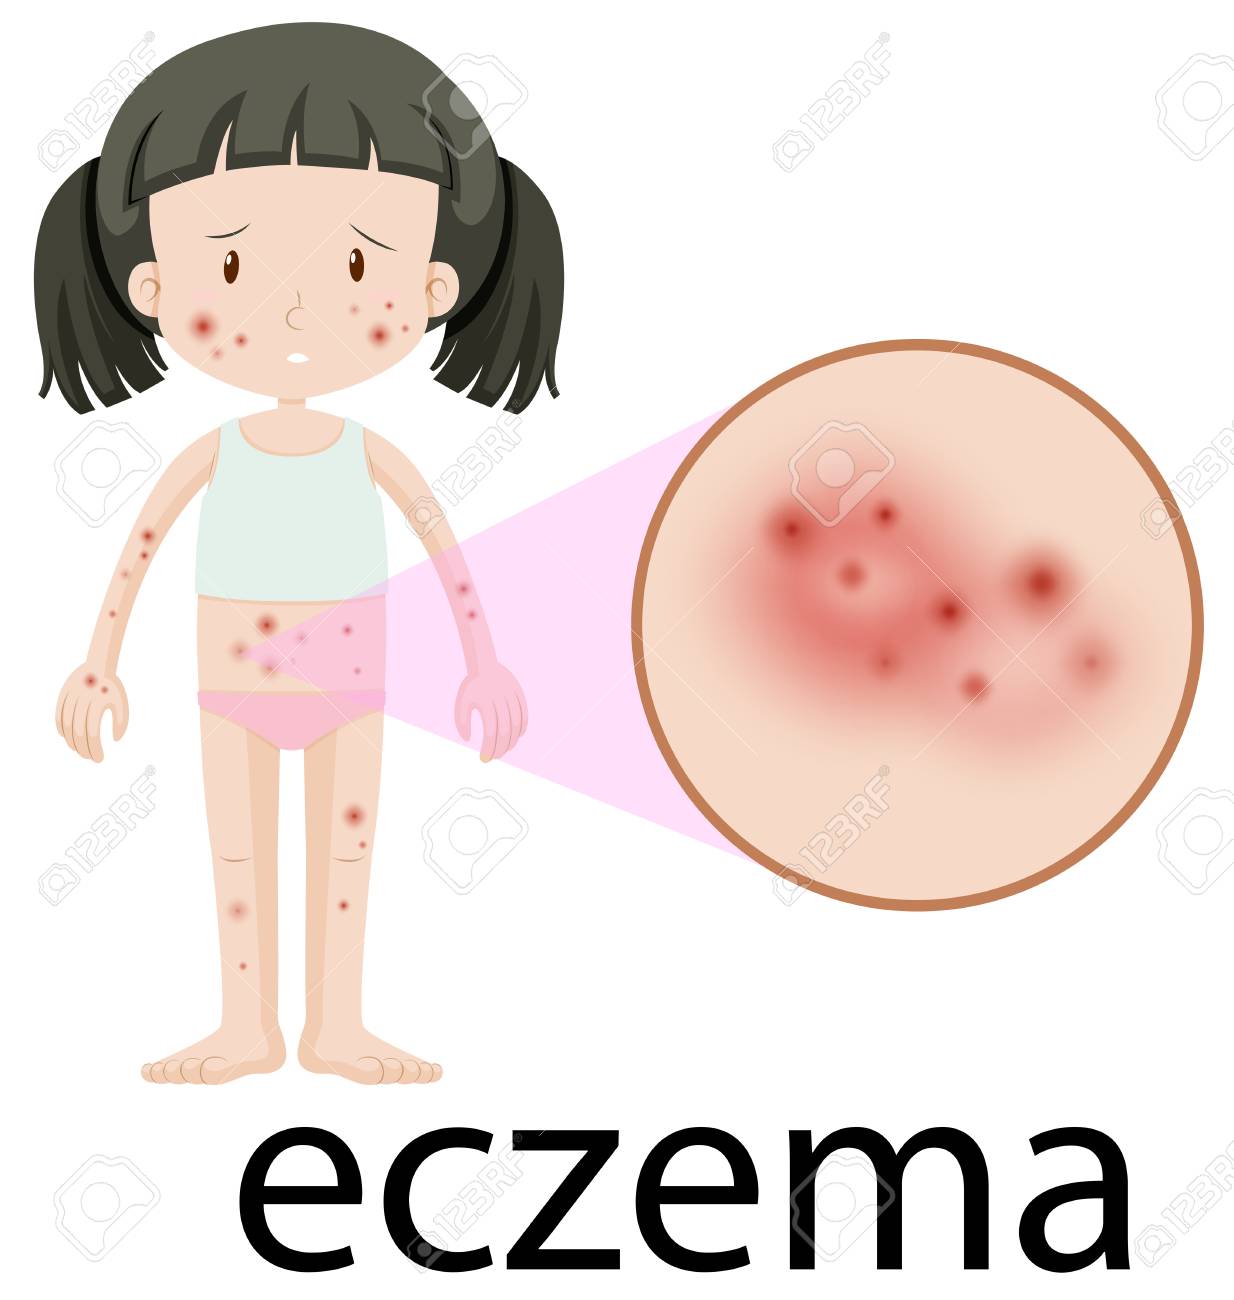 A Girl With Eczema On White Background Illustration Royalty